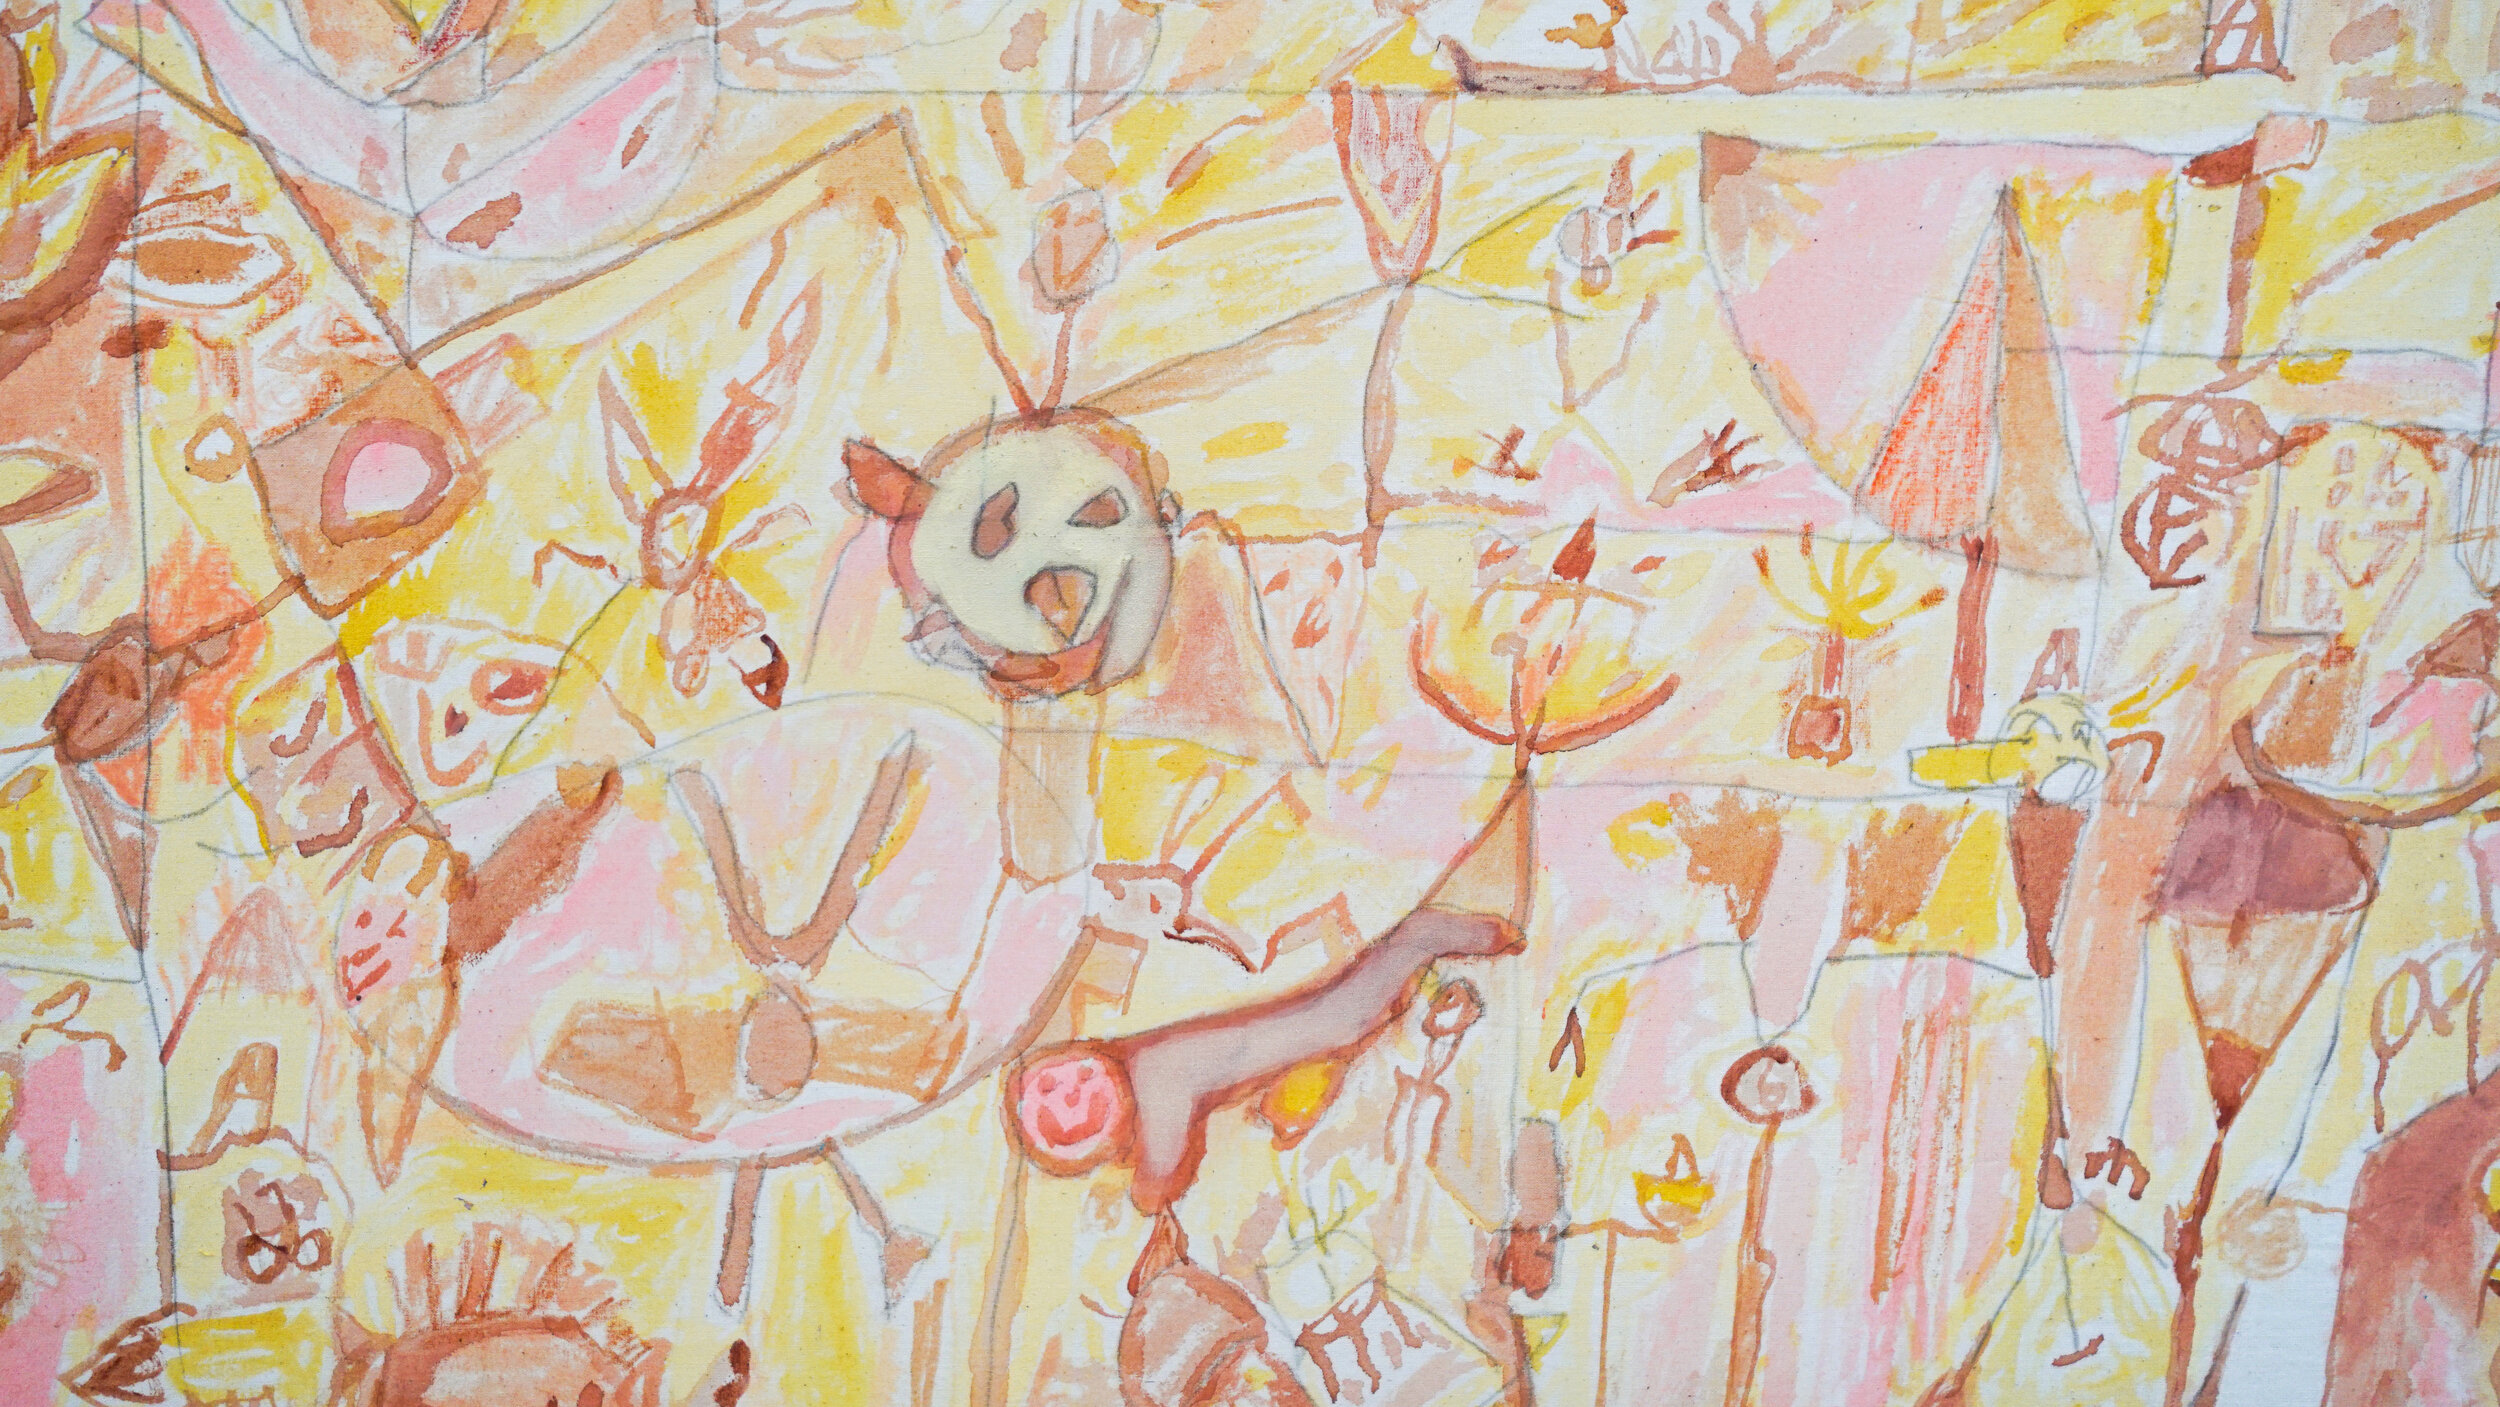  Ross Simonini   The Unders , 2020 (detail) Watercolor, tempera, wax crayon, and graphite on muslin  95 x 44.5 inches 